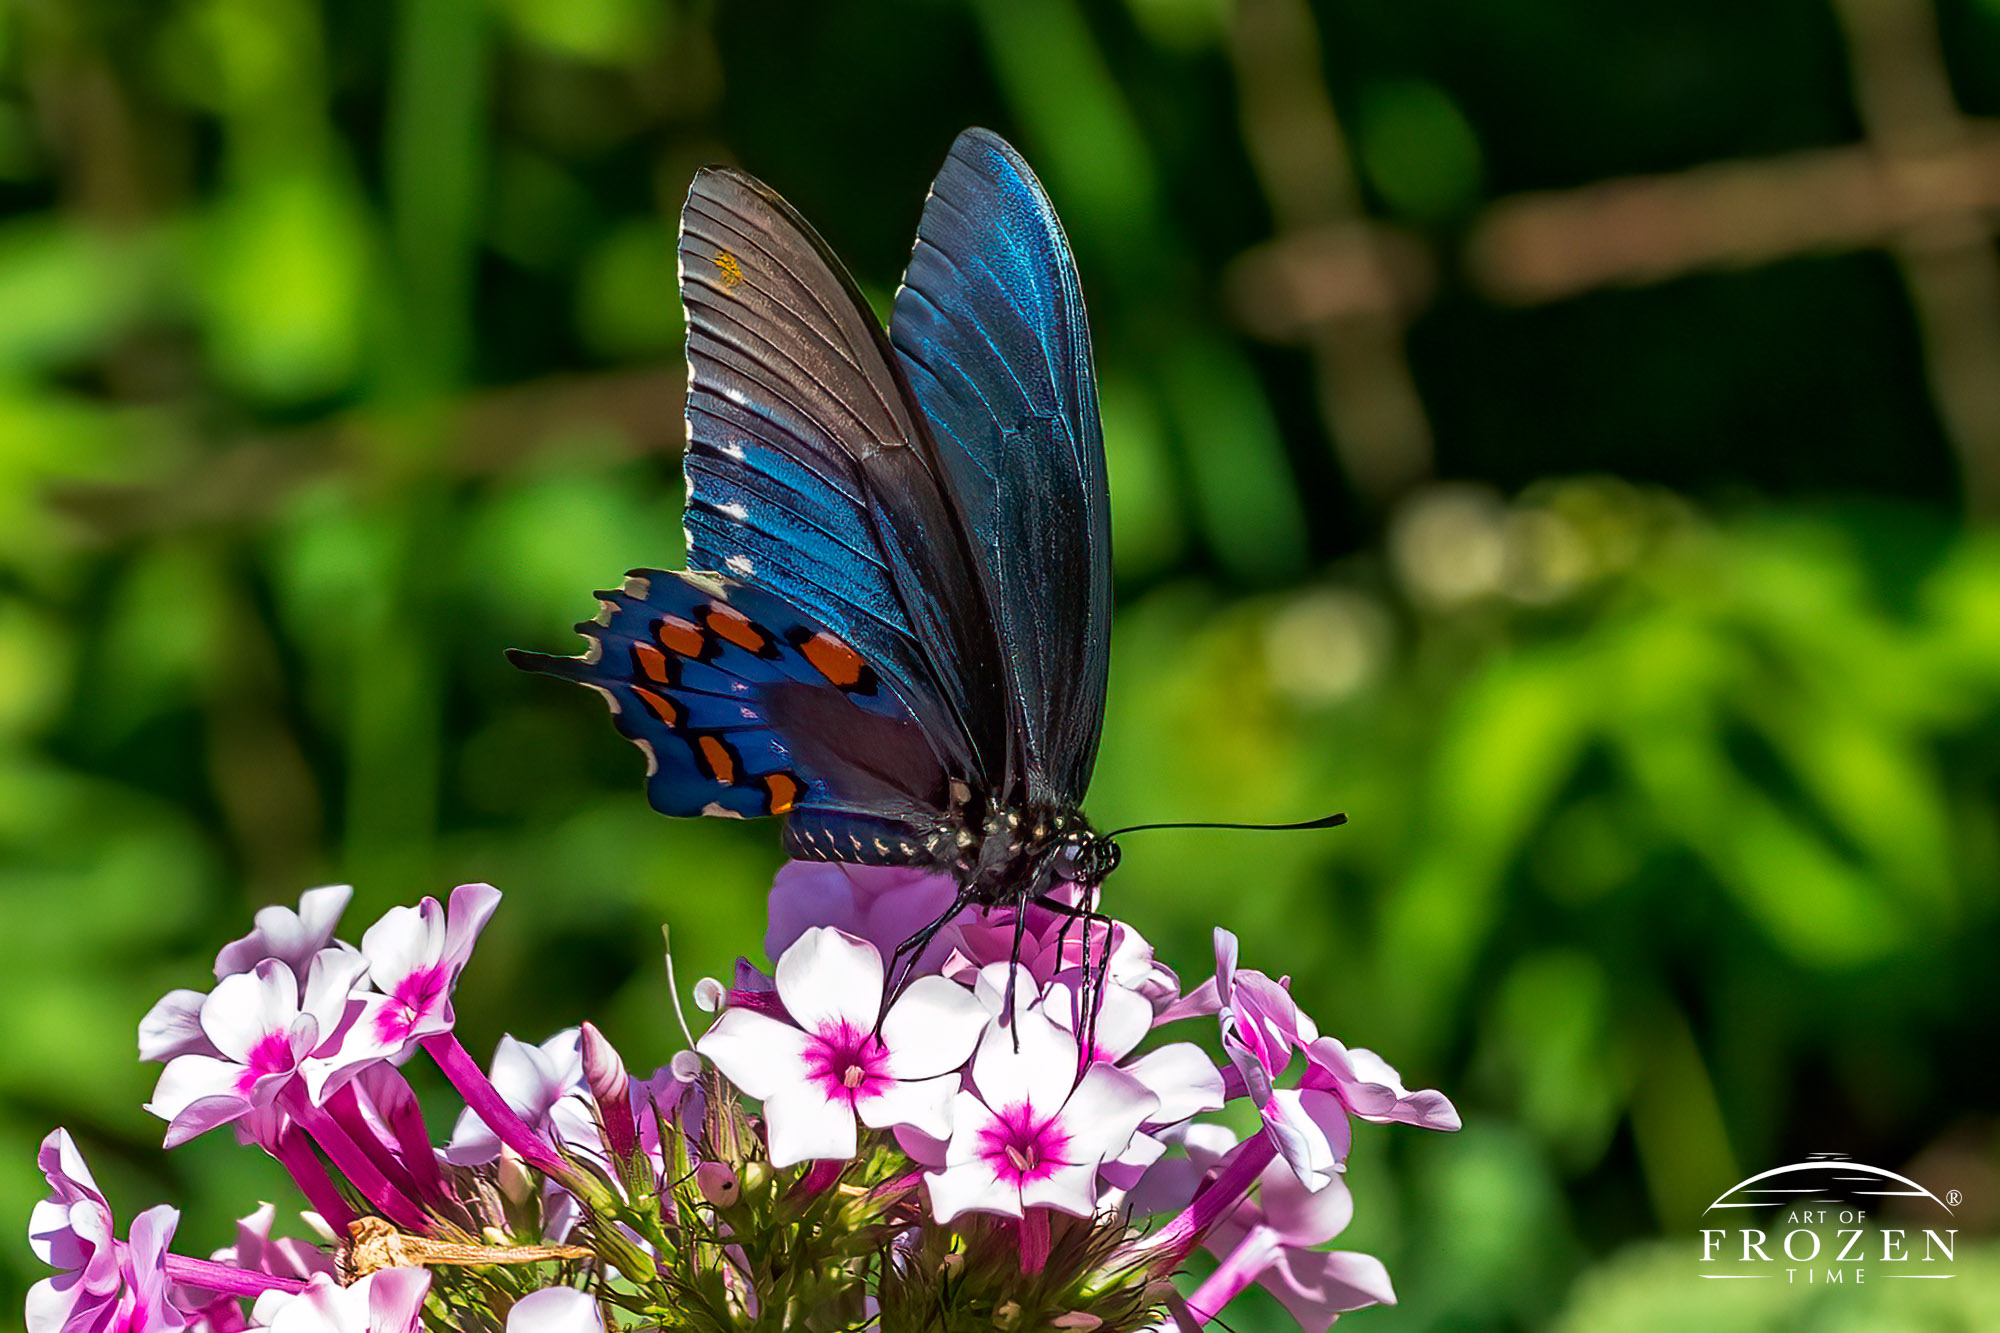 An irridenscent blue butterfly with orange spots feeding on pink phlox on a sunny day